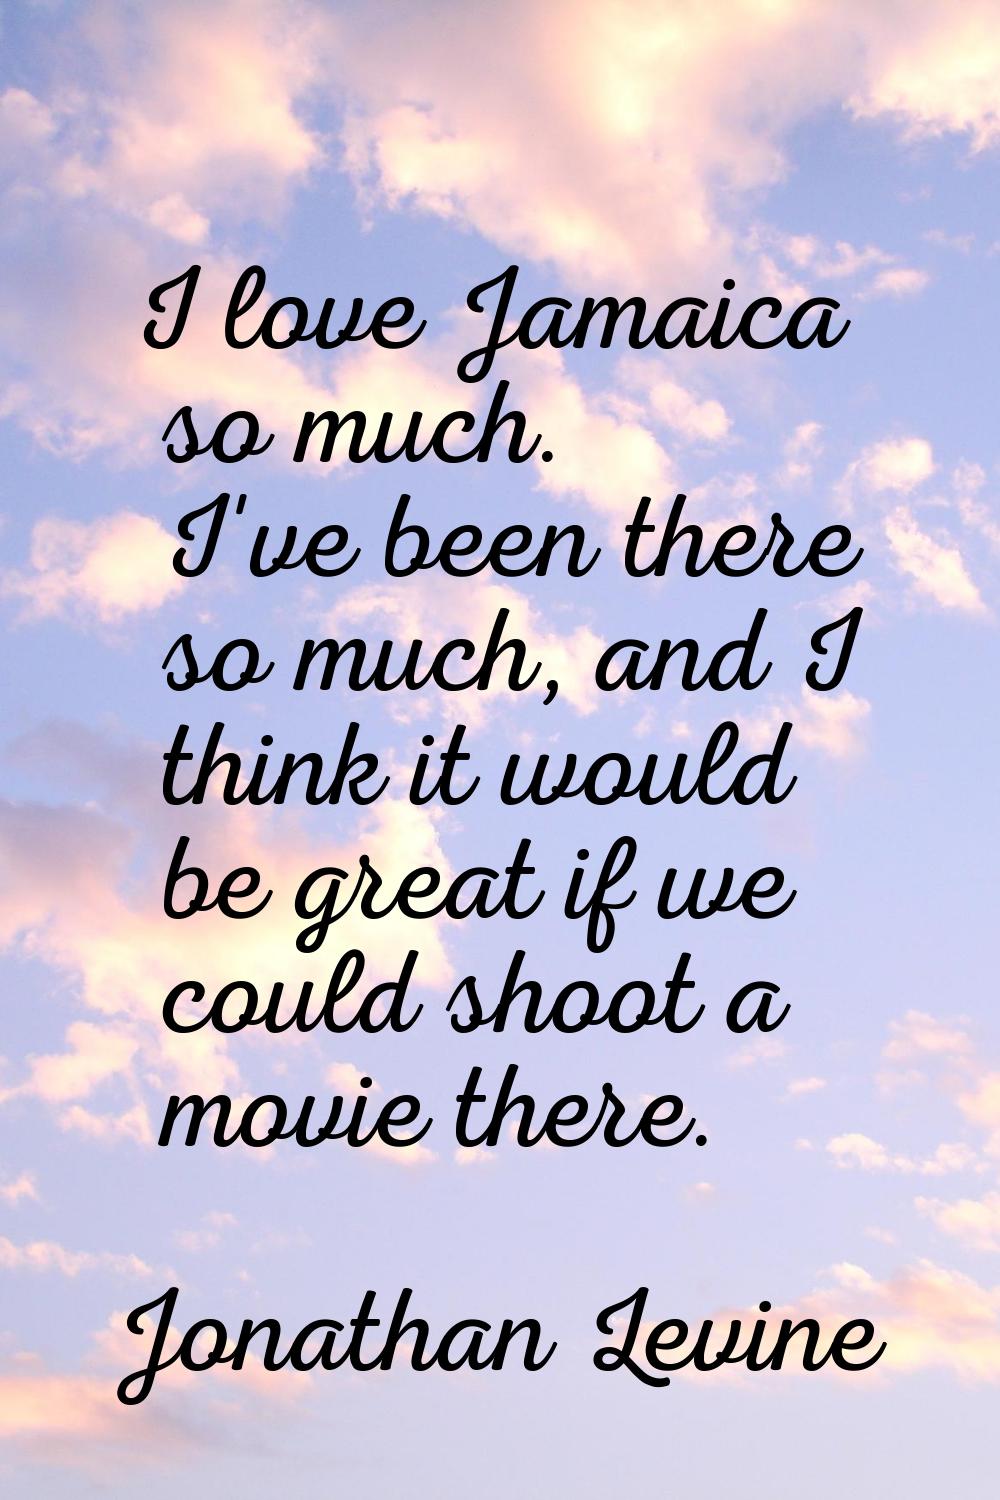 I love Jamaica so much. I've been there so much, and I think it would be great if we could shoot a 